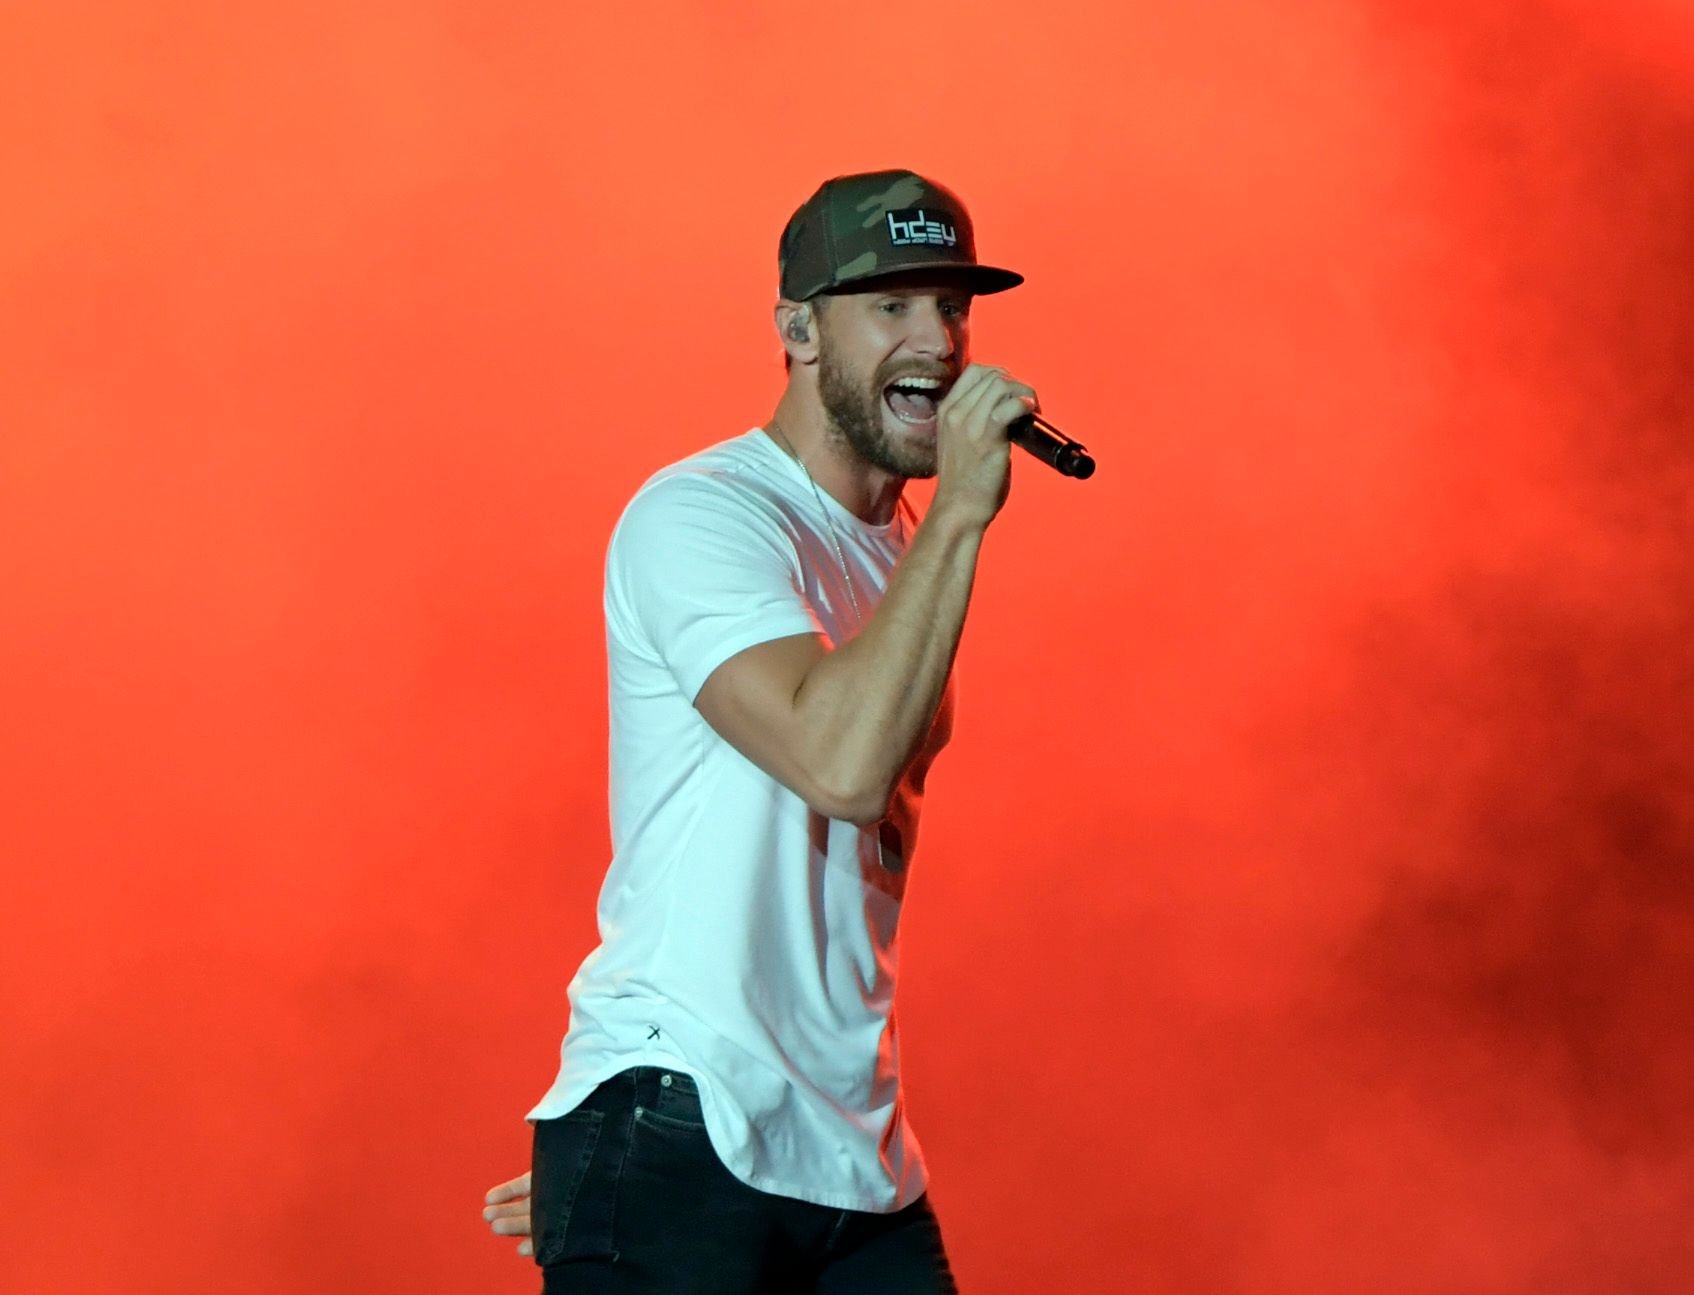 Chase Rice performs at 2019 CMA Music Festival - Day 1 at Ascend Amphitheater on June 06, 2019 | Photo: Getty Images